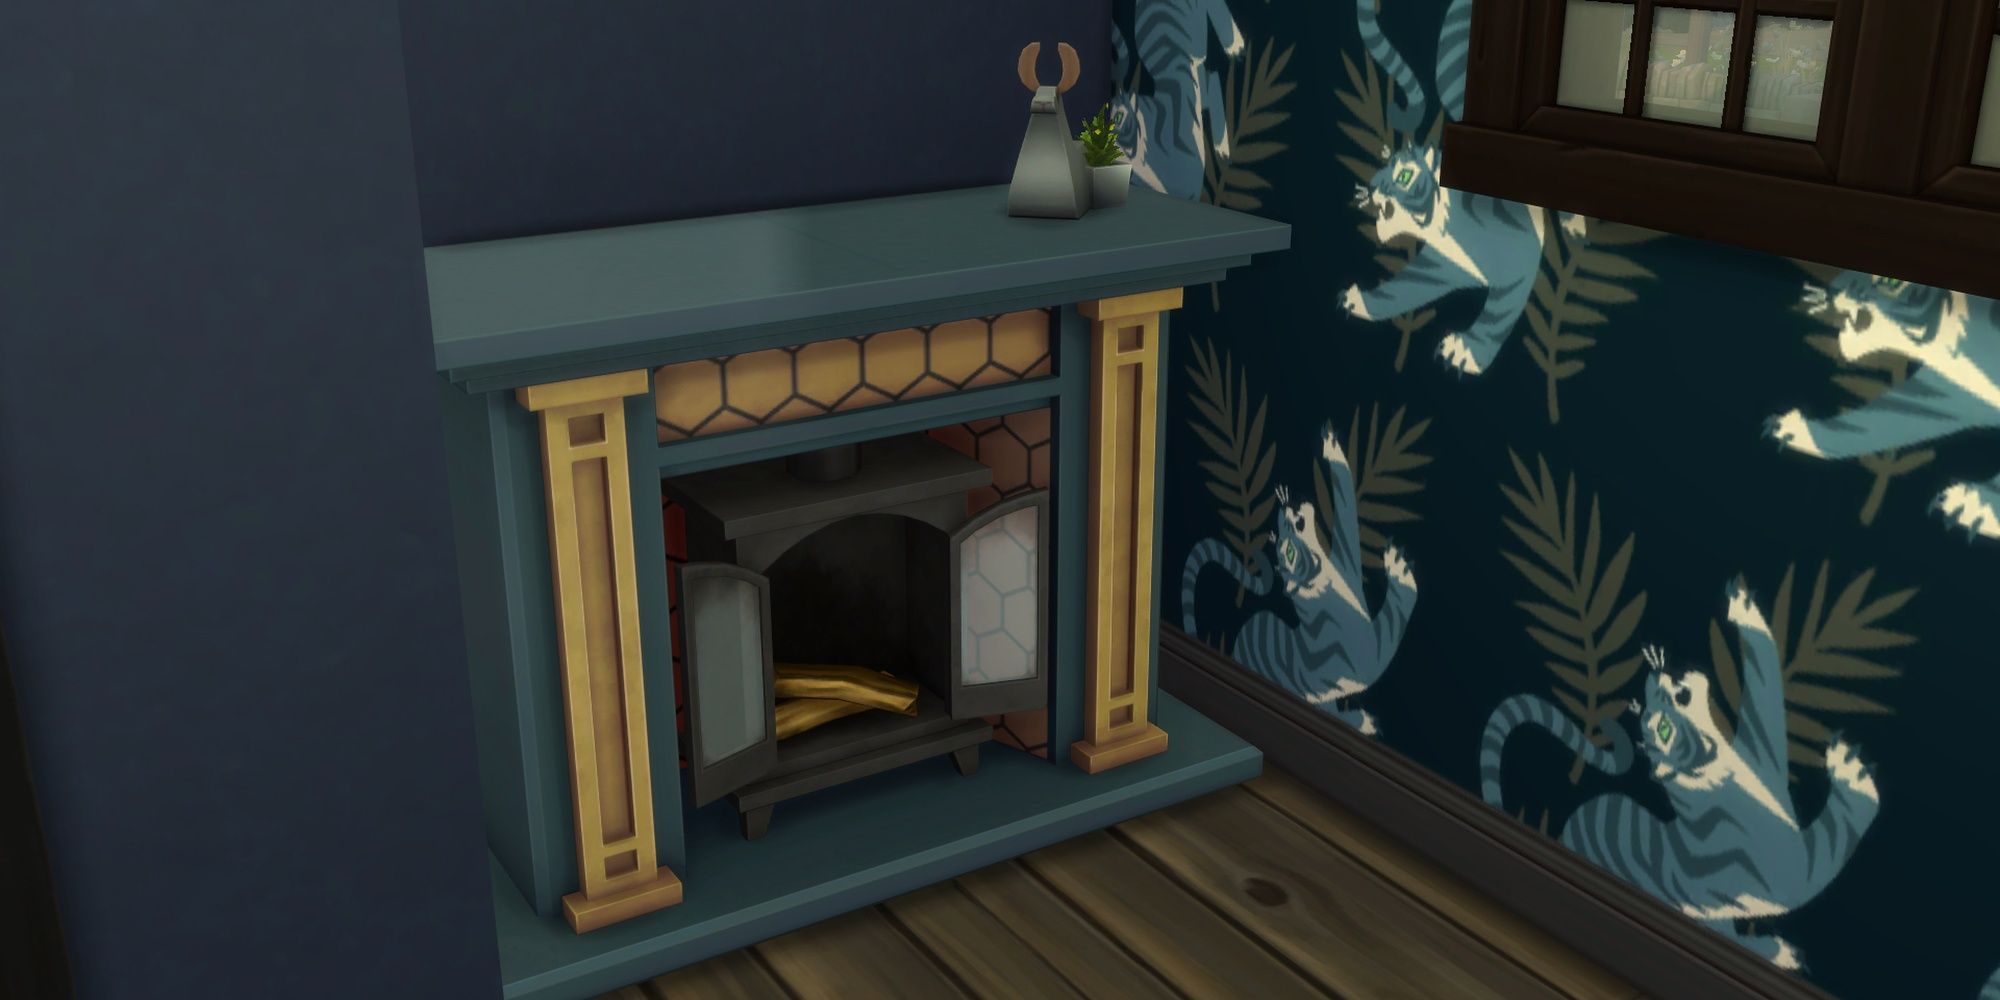 A Warmly Chromatic Fireplace from The Sims 4: Decor to the Max